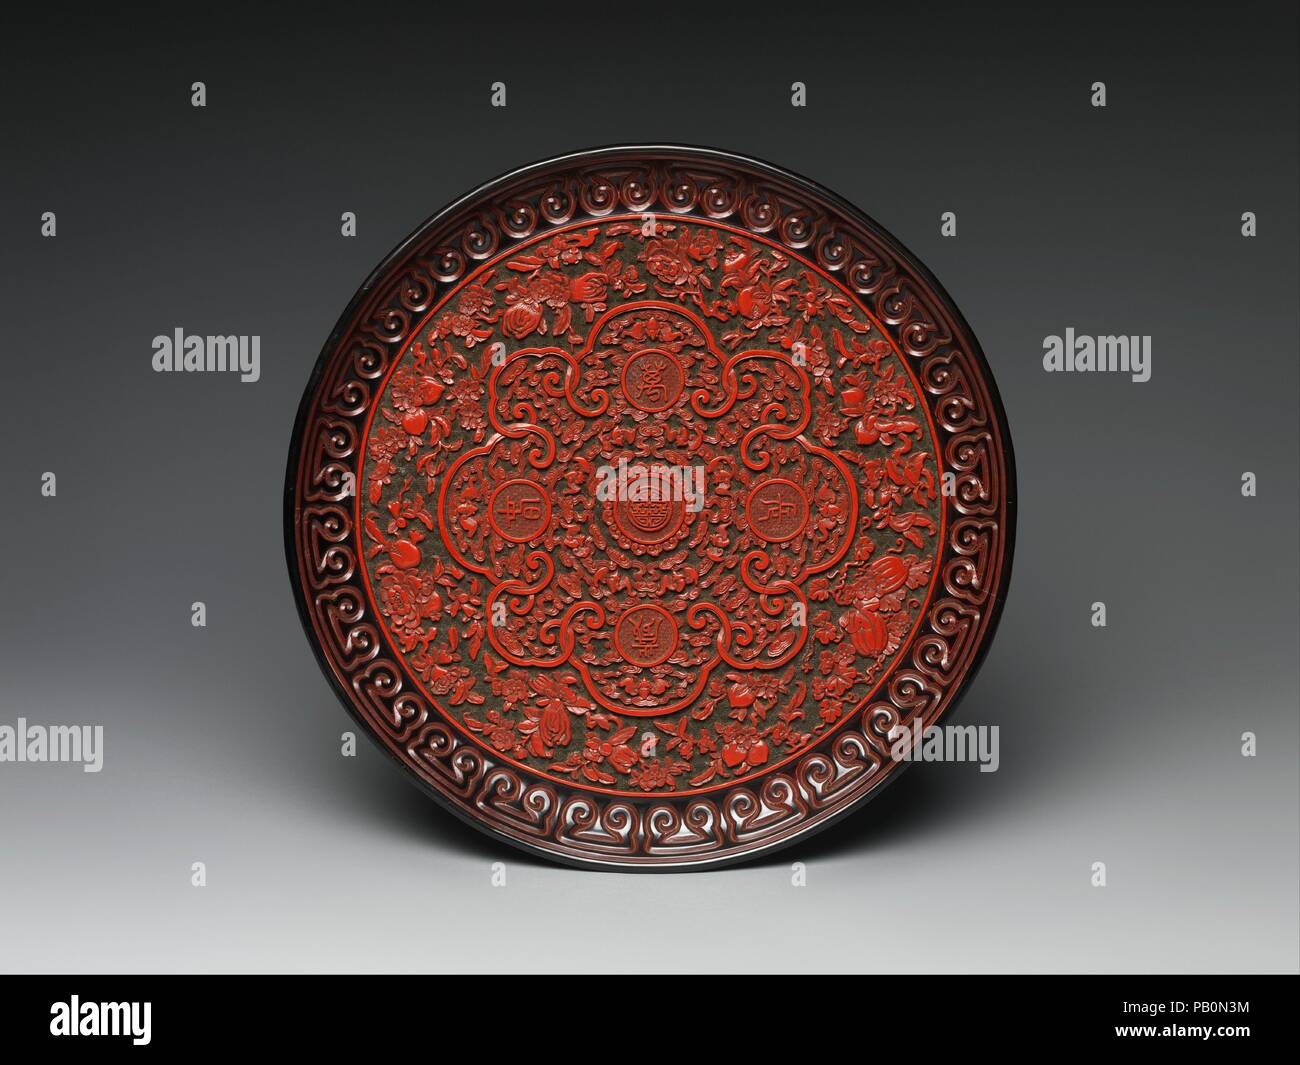 Tray with Chinese characters, bats, and fruits. Culture: China. Dimensions: Diam. 14 1/2 in. (36.8 cm). Date: 1736-1795.  The dense, multilayered surface of this dish is typical of Qianlong-period carved lacquer. At center is the character for longevity (shou) surrounded by first a circle of bats and then a lobed cartouche containing the phrase 'ten thousand longevities and eternal spring' (wan sui chang chun). The outer border of fruits and flowers also refers to long life. The dish was likely presented as a birthday present or used to proffer and display a gift. Museum: Metropolitan Museum o Stock Photo